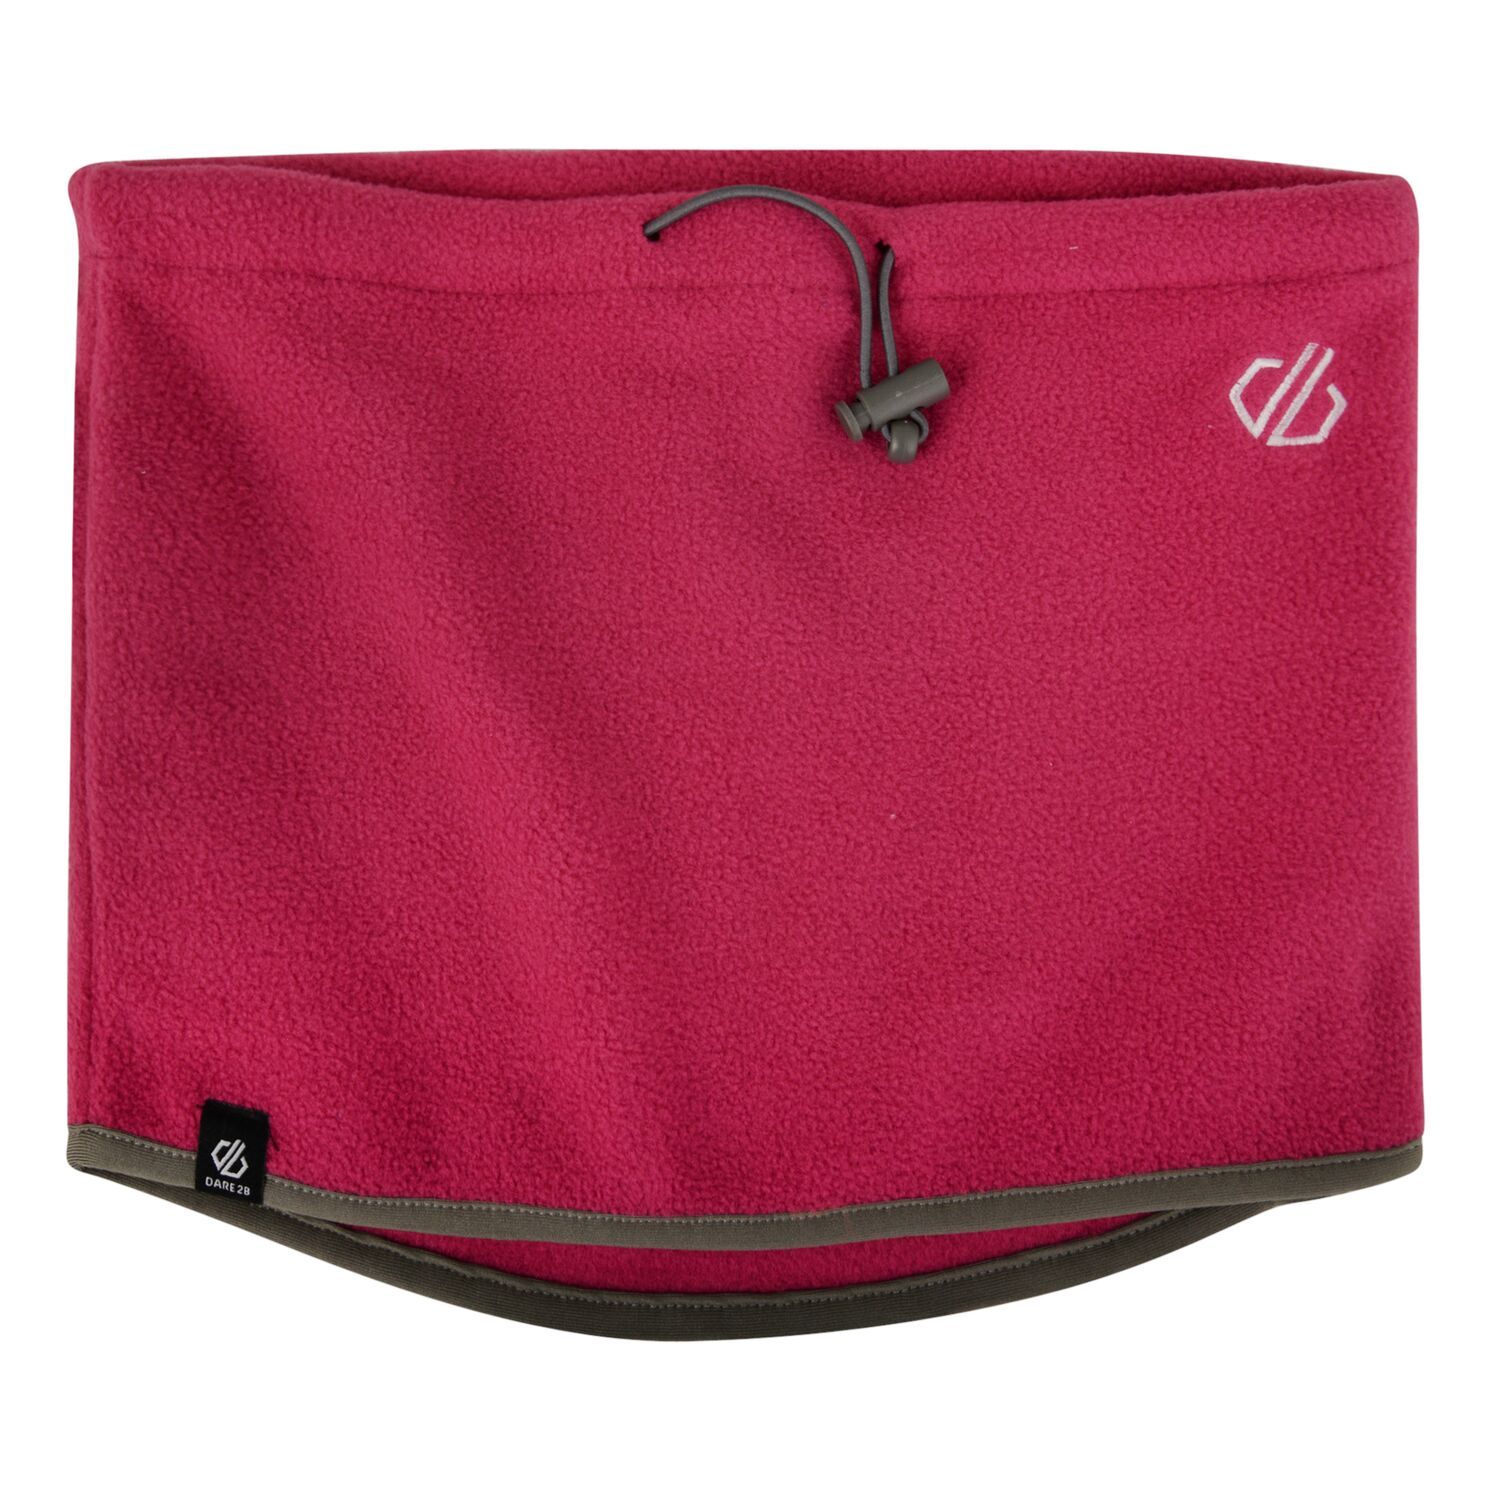 Material: polyester: 100%. 100% polyester microfleece. Adjustable shockcord top and fastening. Stretch binding at hem.